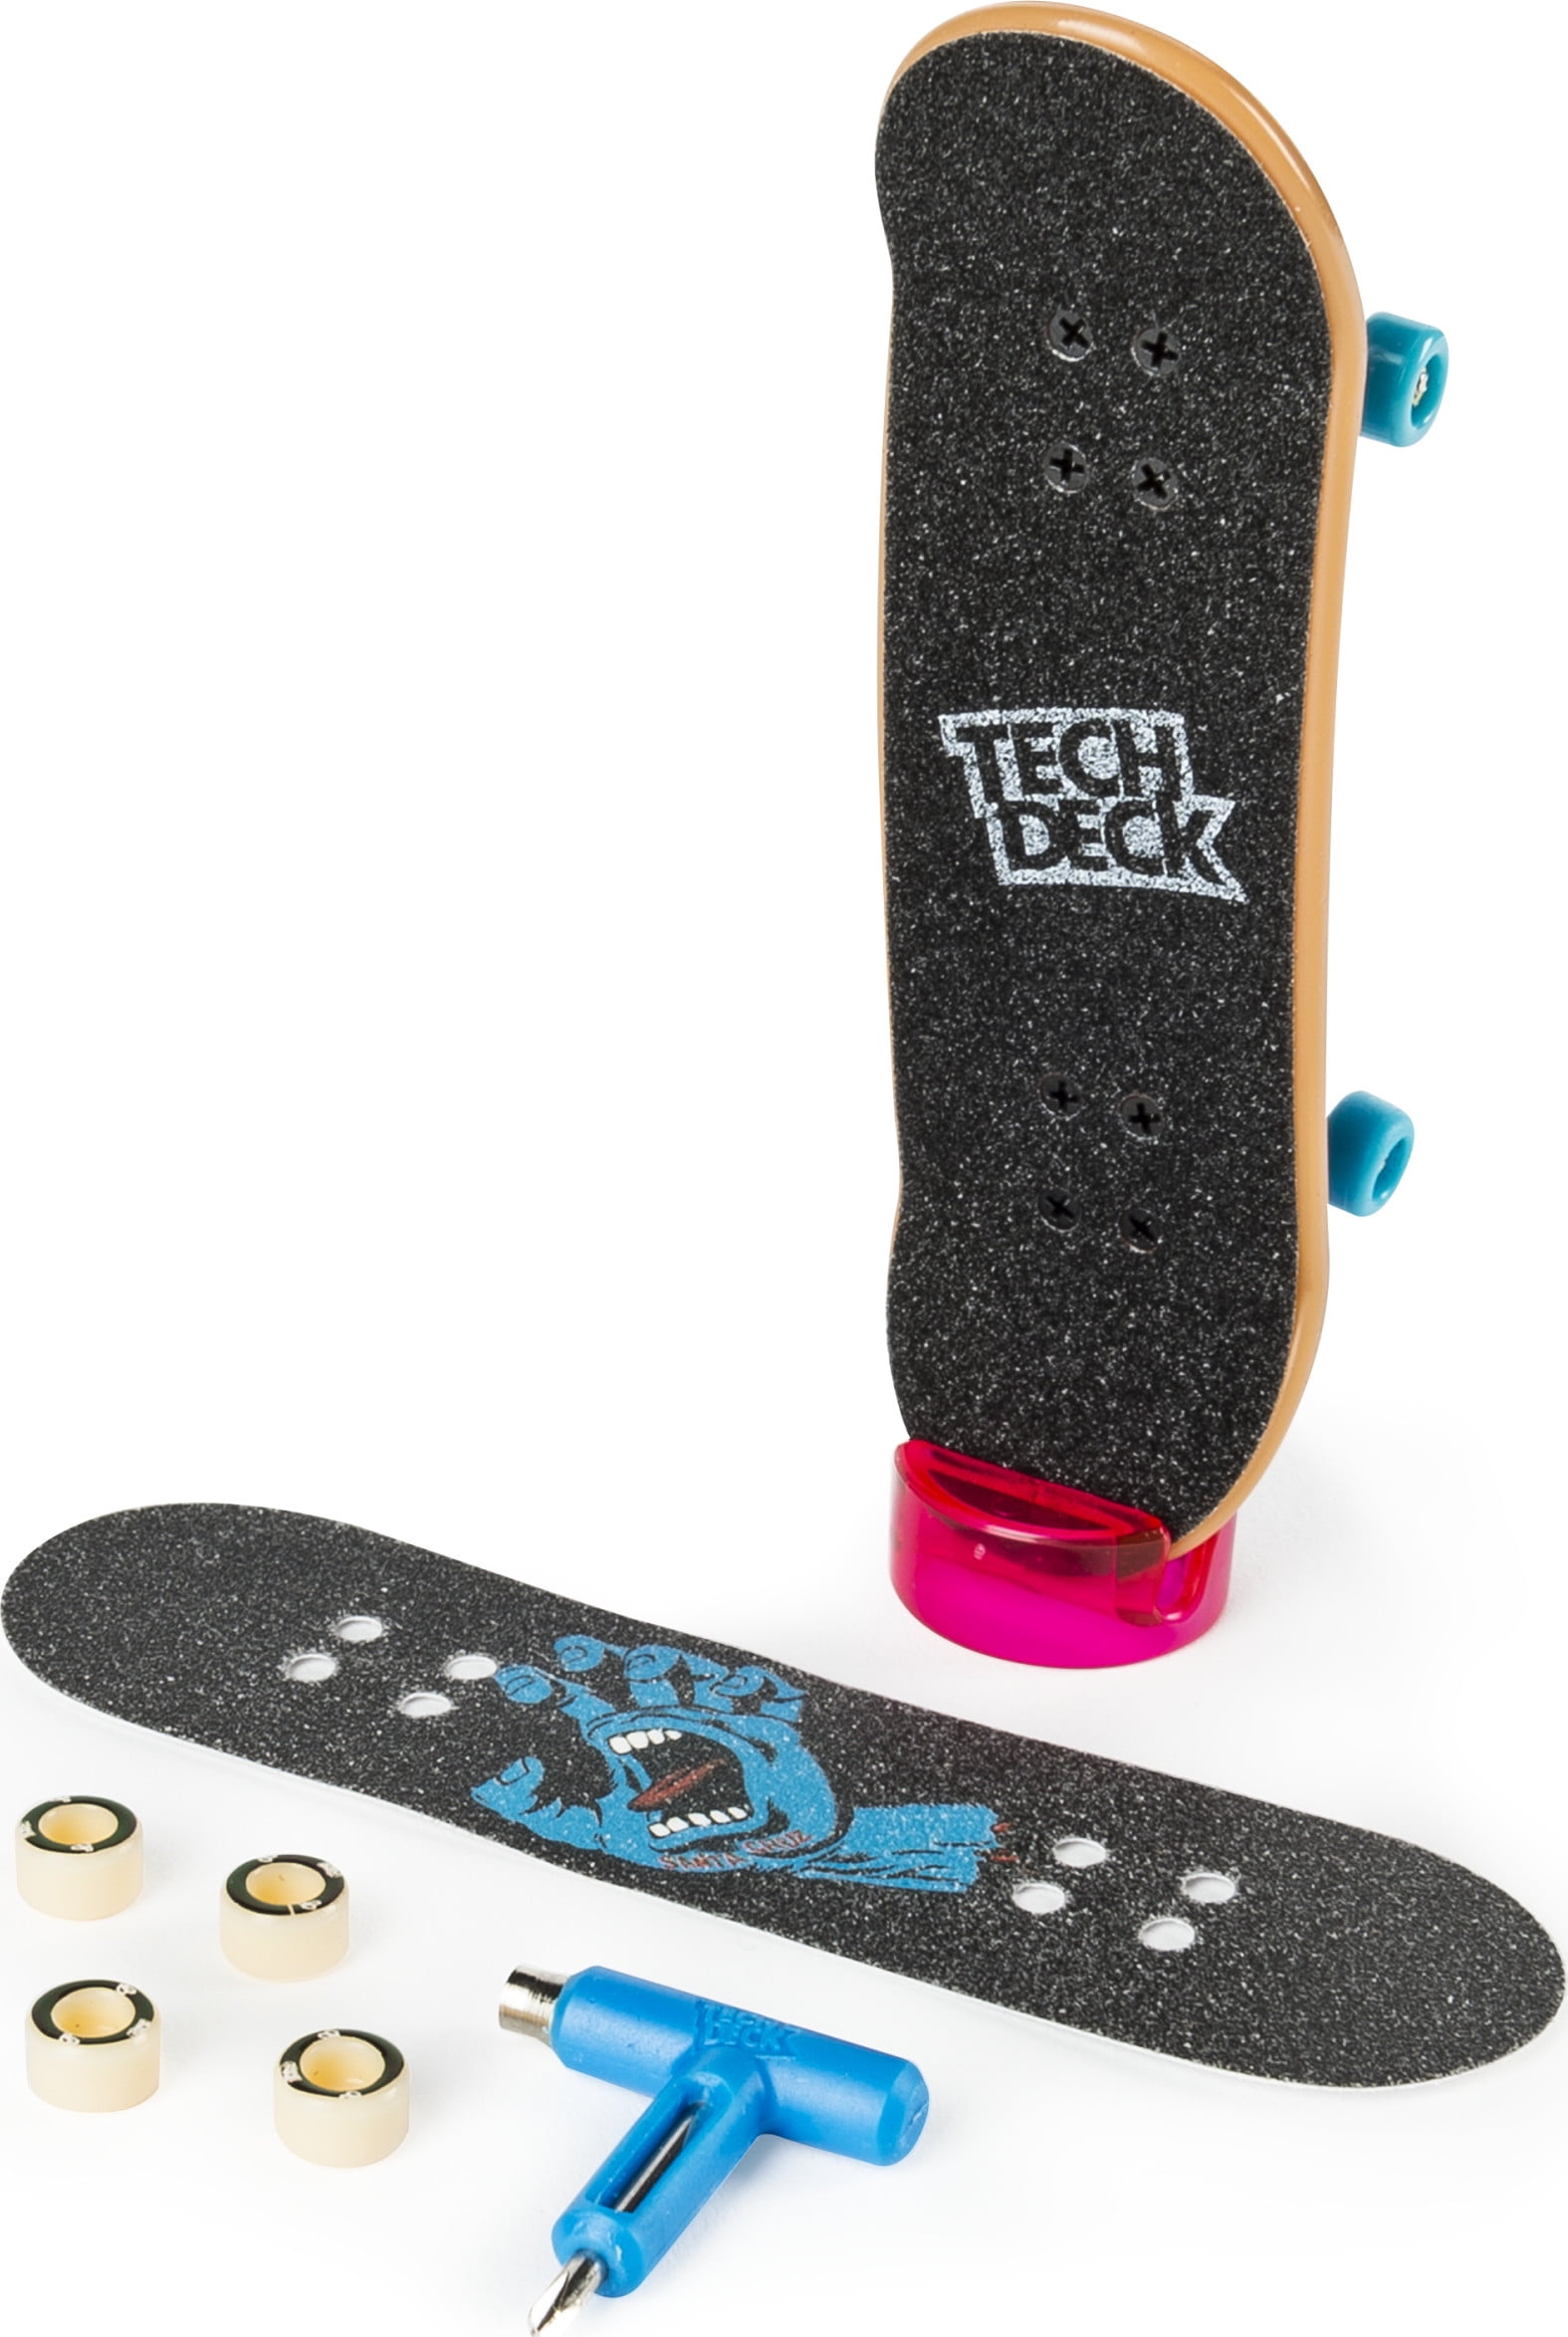 kit sandaler Calamity Tech Deck, 96mm Fingerboard with Authentic Designs, For Ages 6 and Up  (Styles May Vary) - Walmart.com